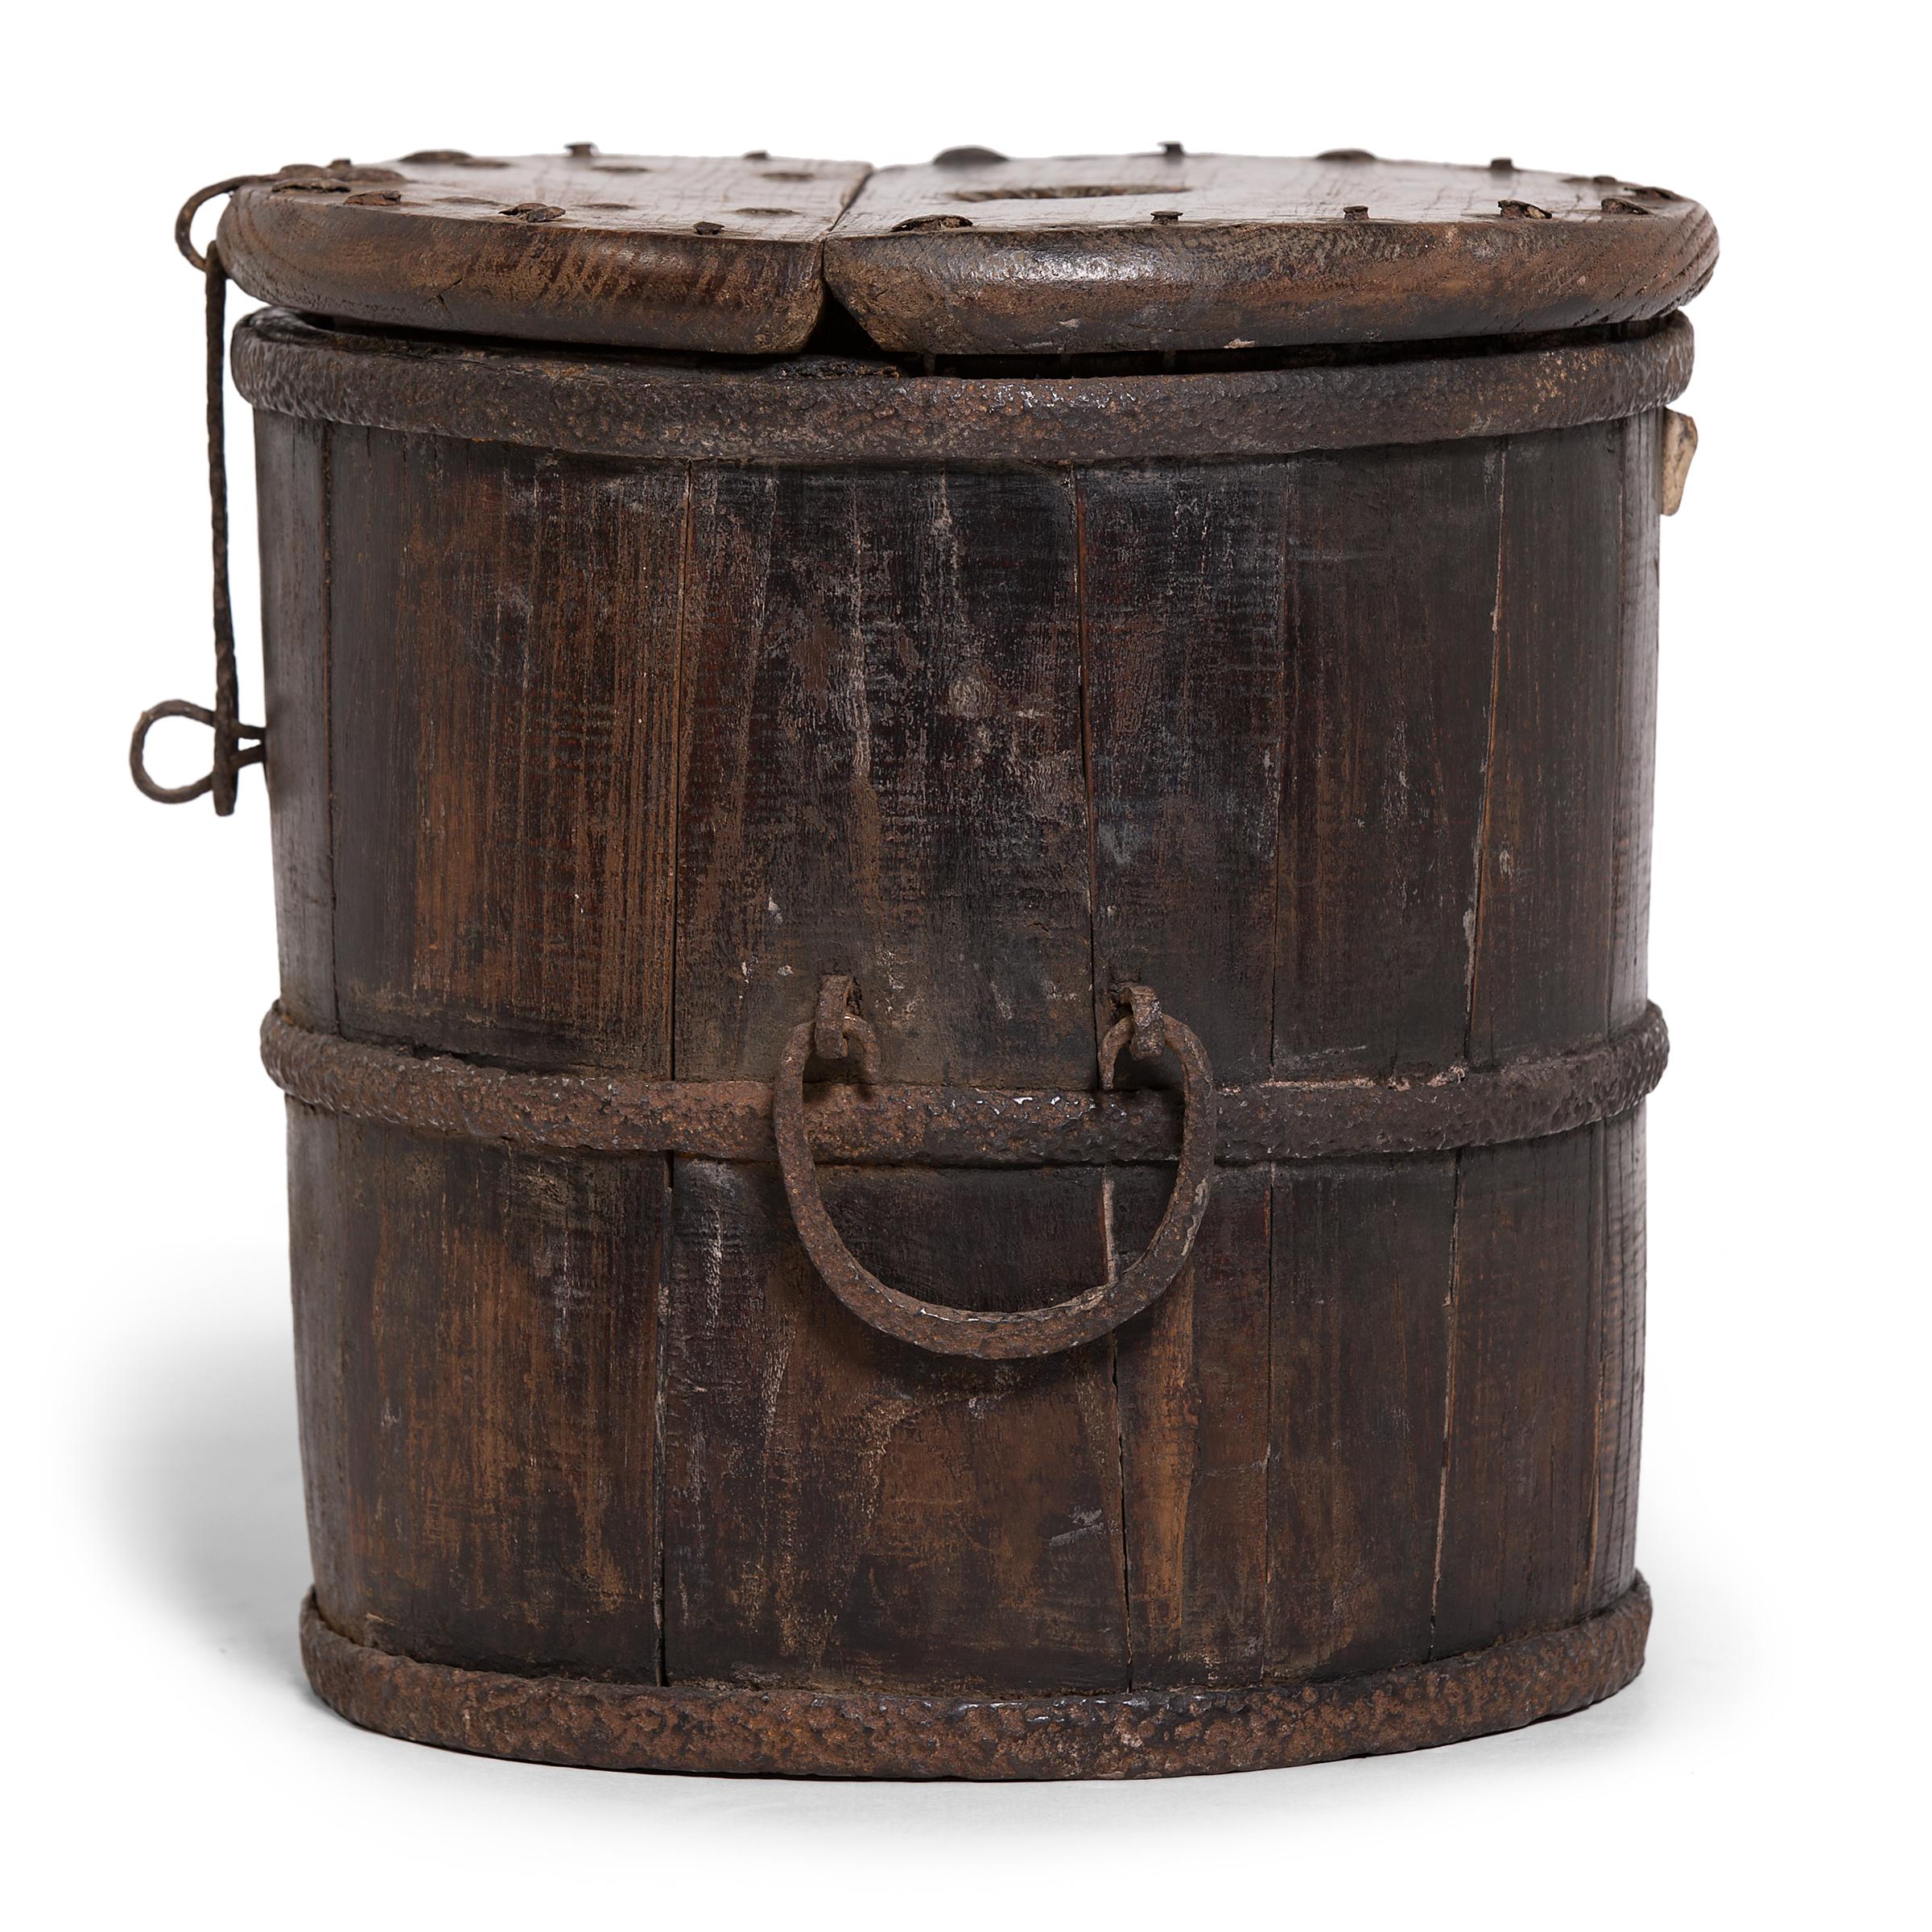 Rustic Chinese Merchant's Coin Barrel, c. 1800